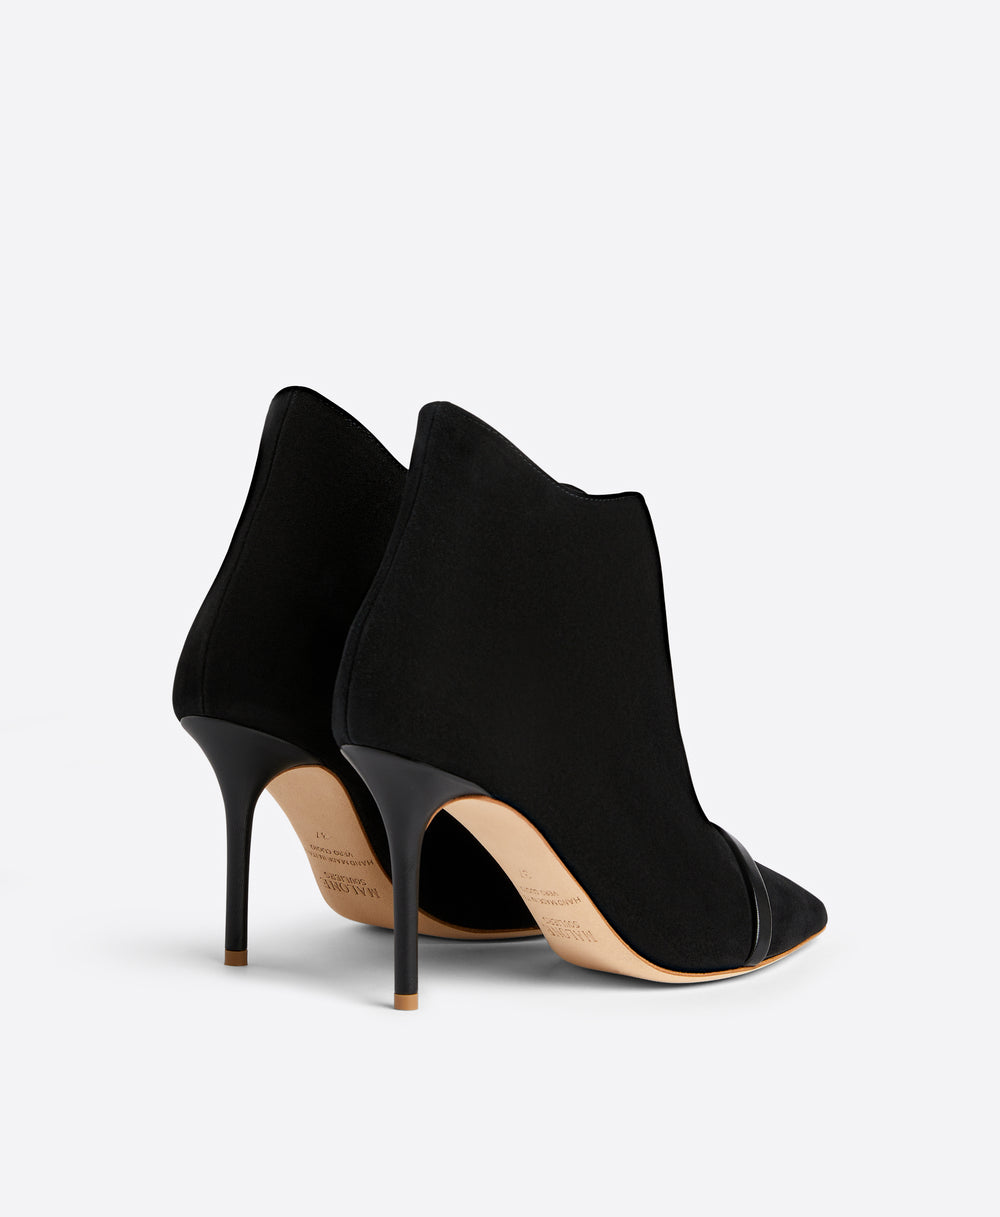 Malone Souliers Cora 85 Black Suede Ankle Boots